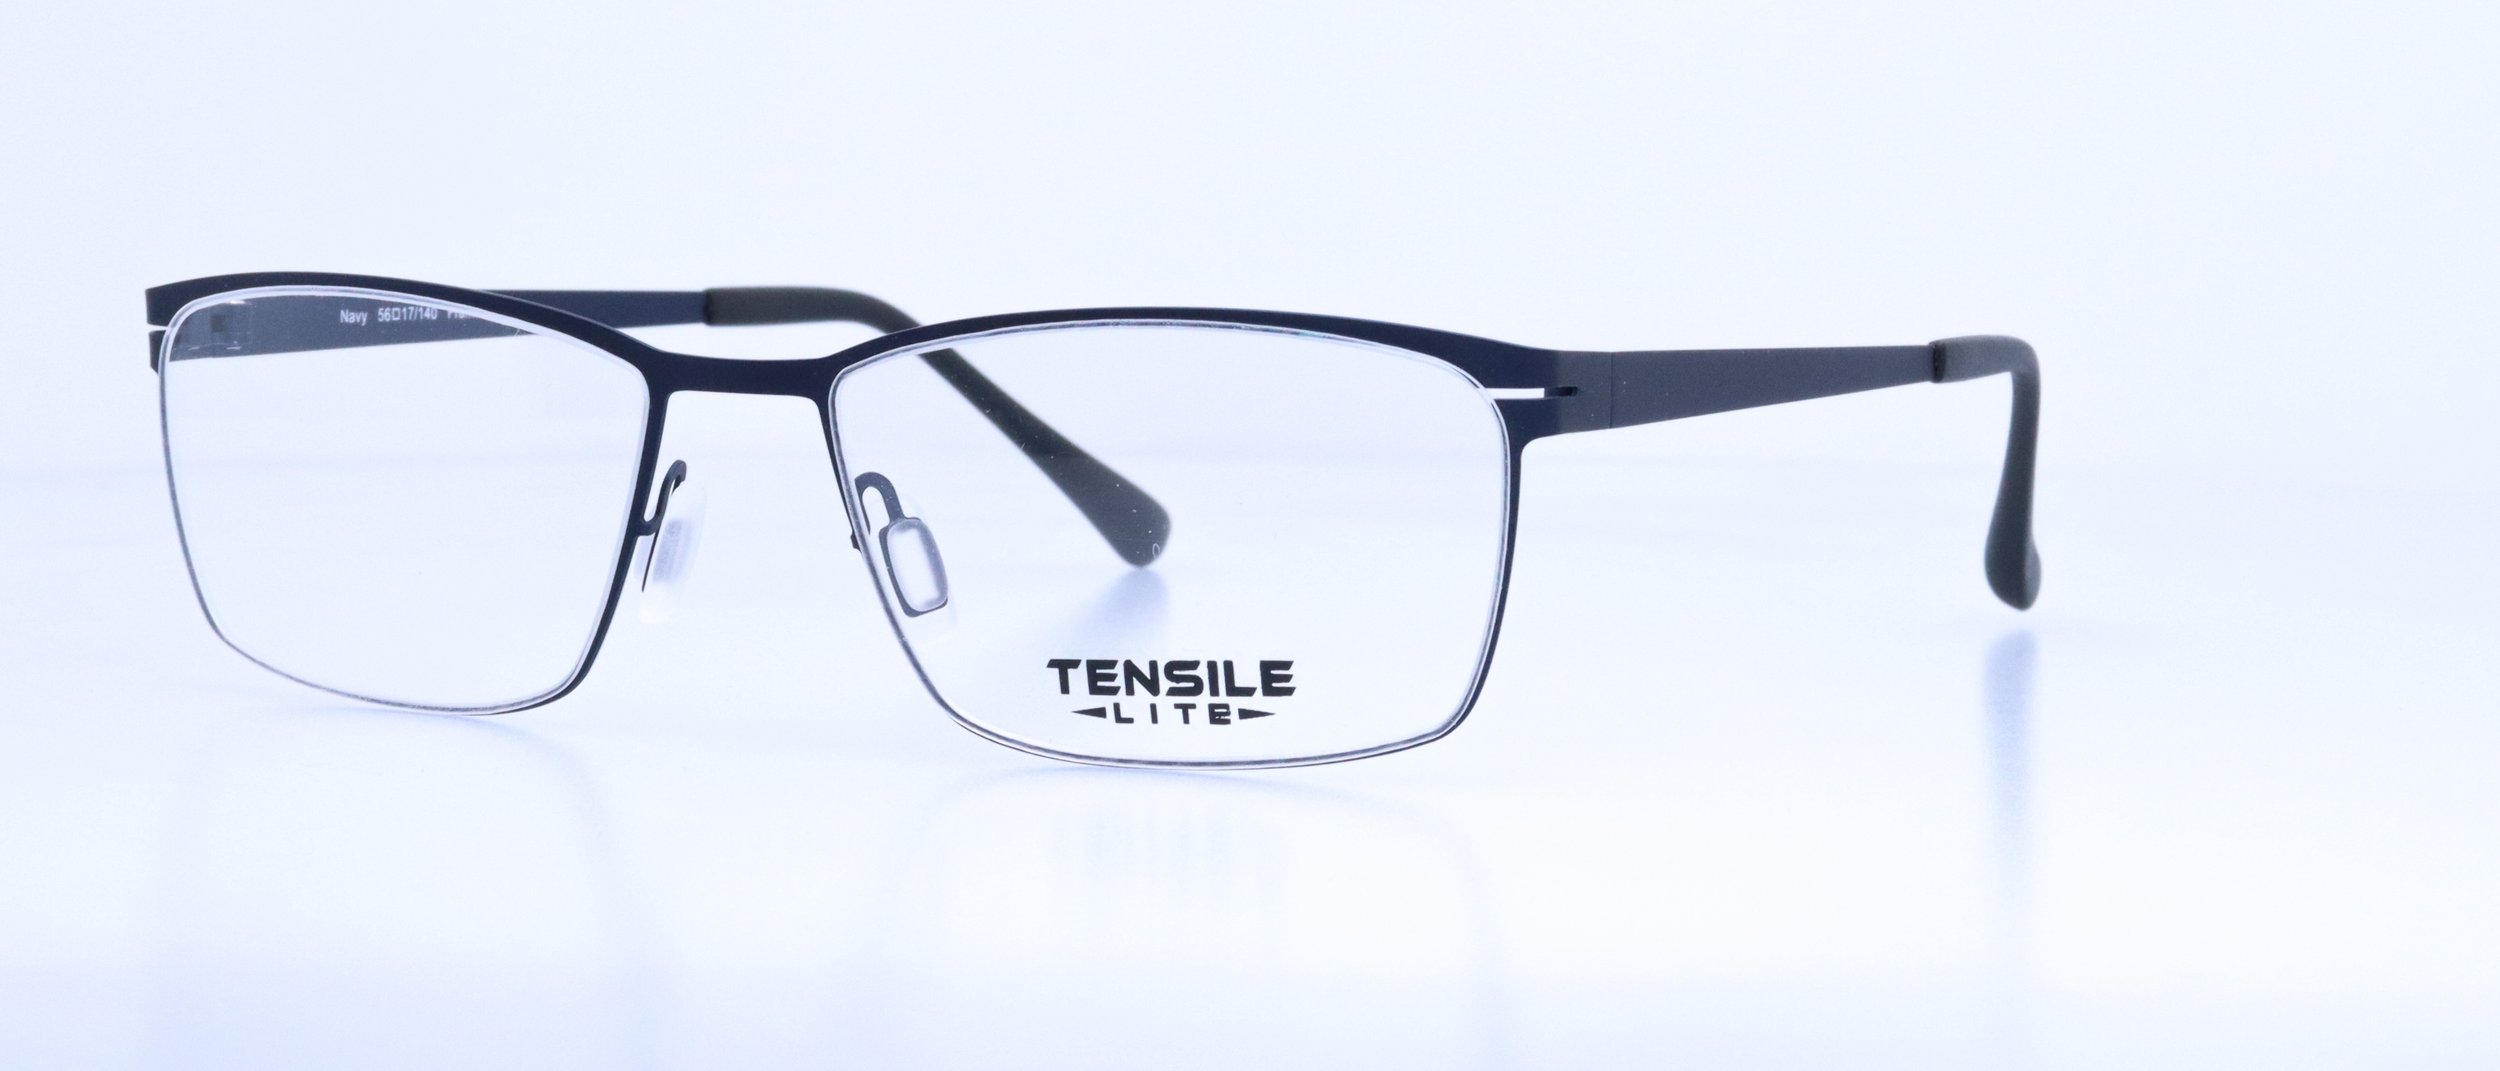  NEW!!! TL710: 56-17-140, Available in Black or Navy 